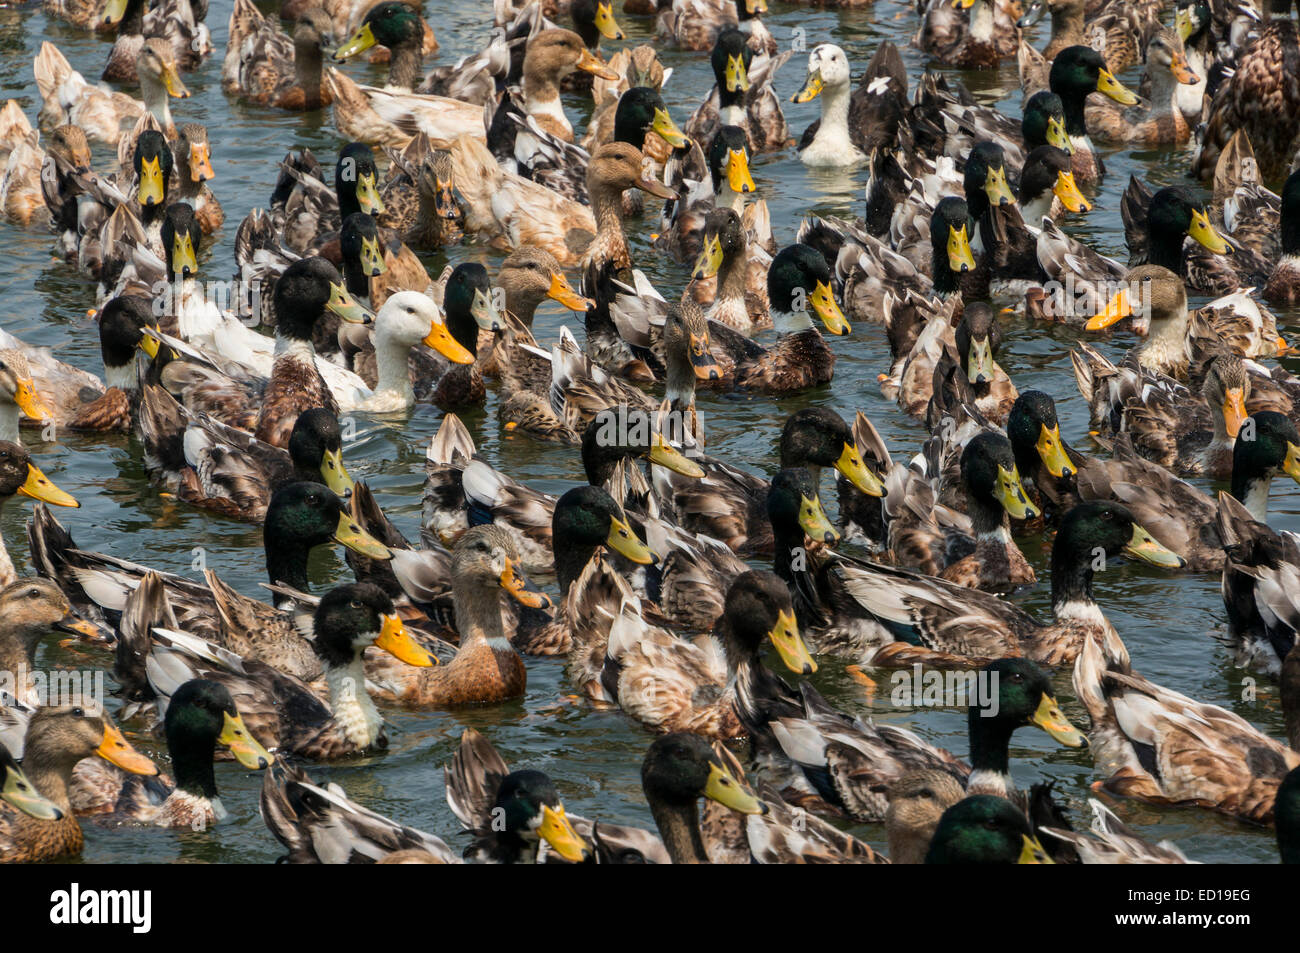 Kerala, India - duck farming on the Pamba river delta waterways and paddy fields. Huge flocks of ducks commercially bred. Stock Photo